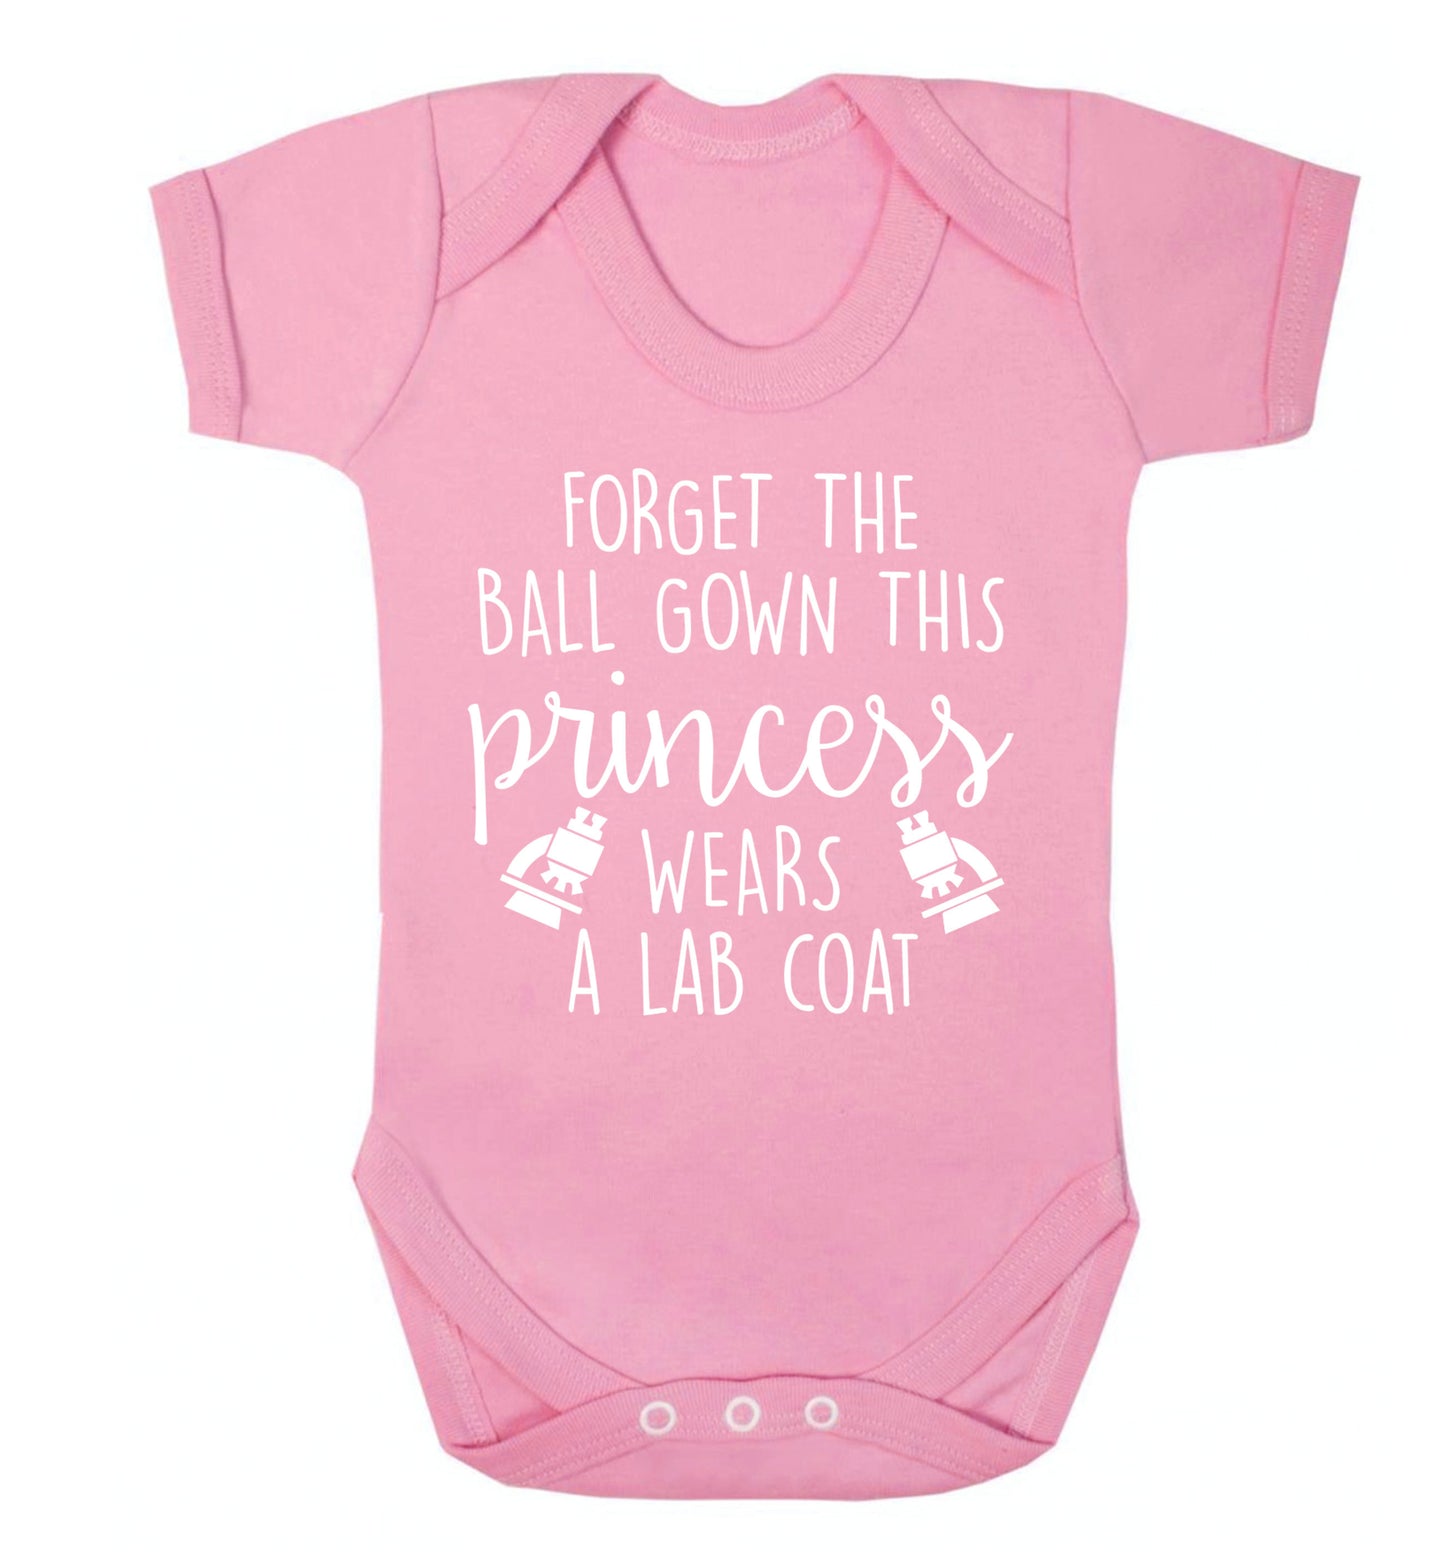 Forget the ball gown this princess wears a lab coat Baby Vest pale pink 18-24 months